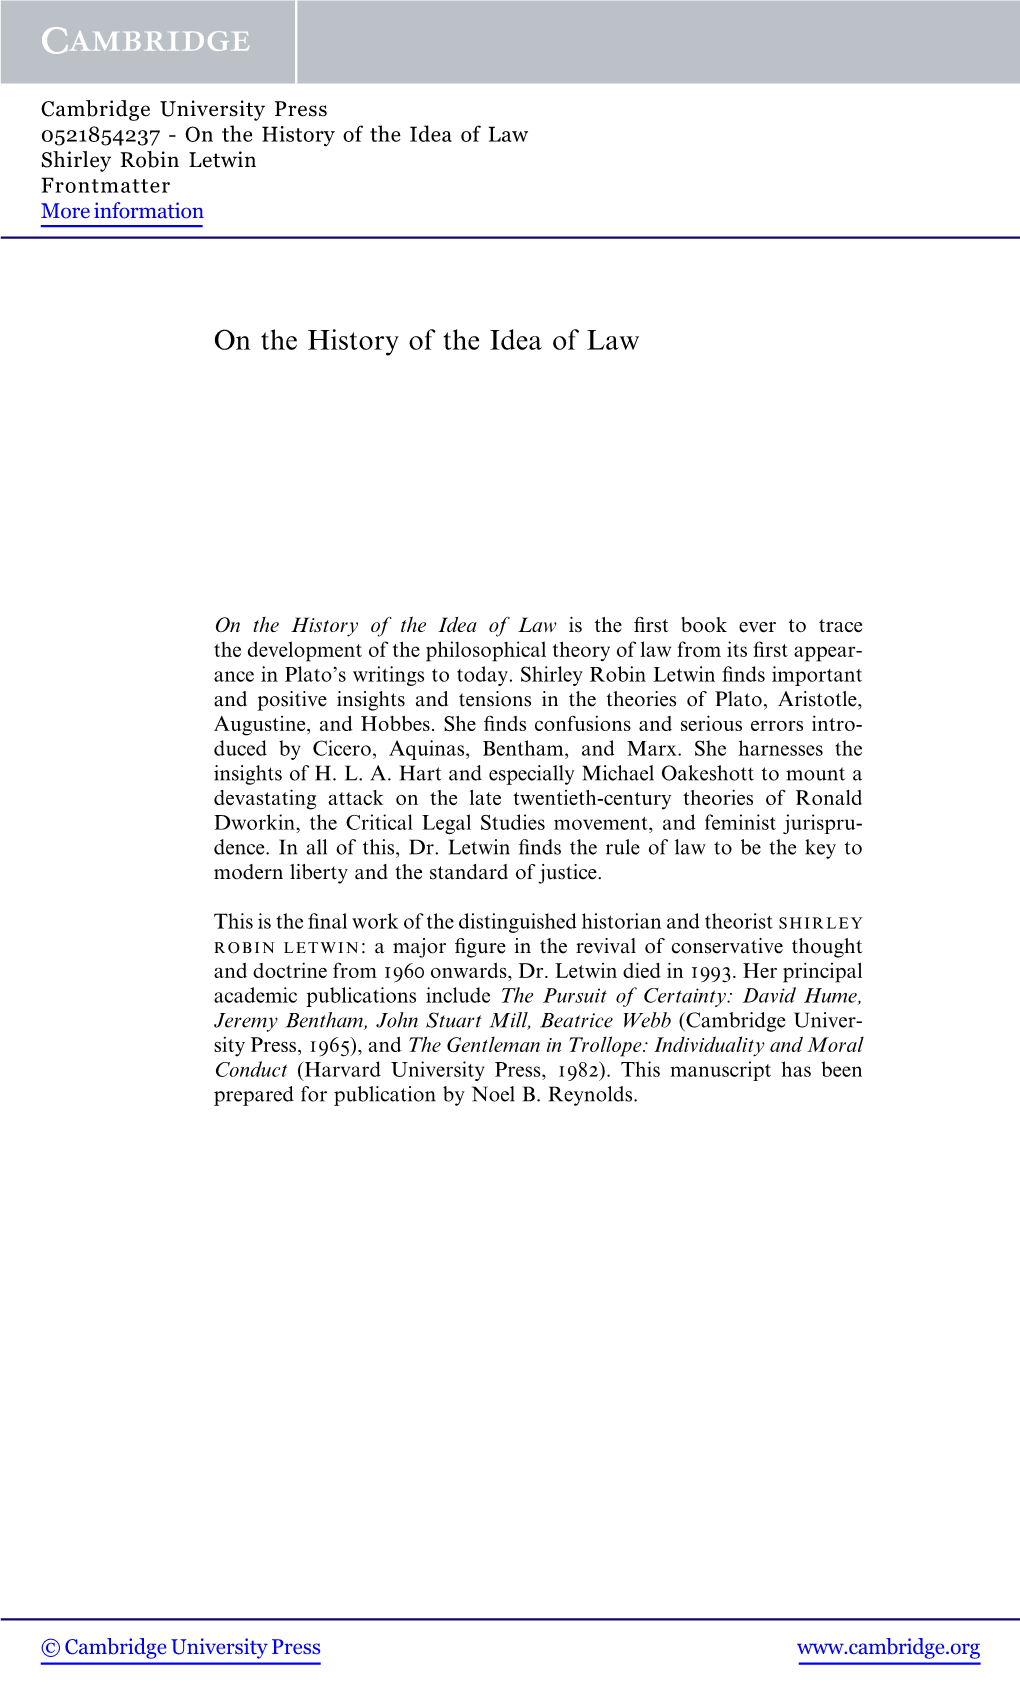 On the History of the Idea of Law Shirley Robin Letwin Frontmatter More Information